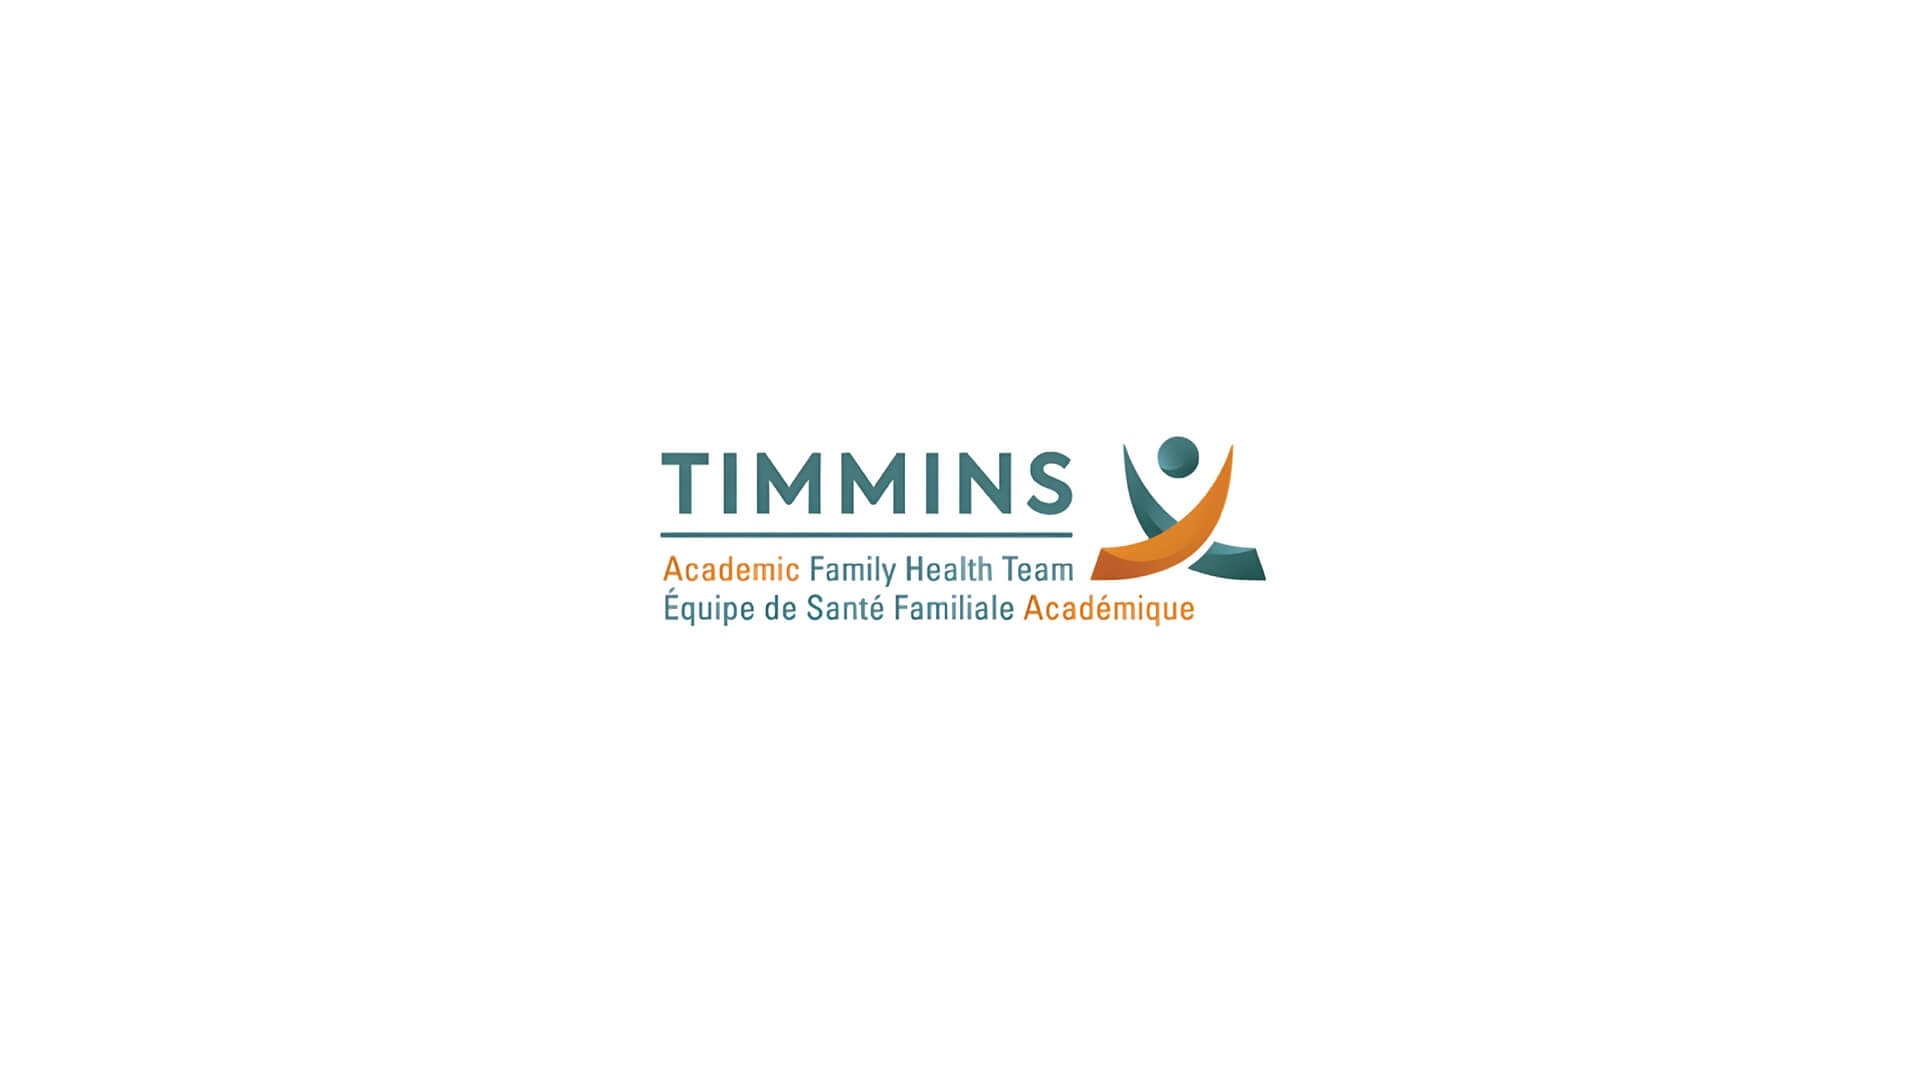 Timmins Care Logo of timmins academic family health team featuring a stylized human figure in blue and orange with english and french text. Cochrane District Social Services Administration Board